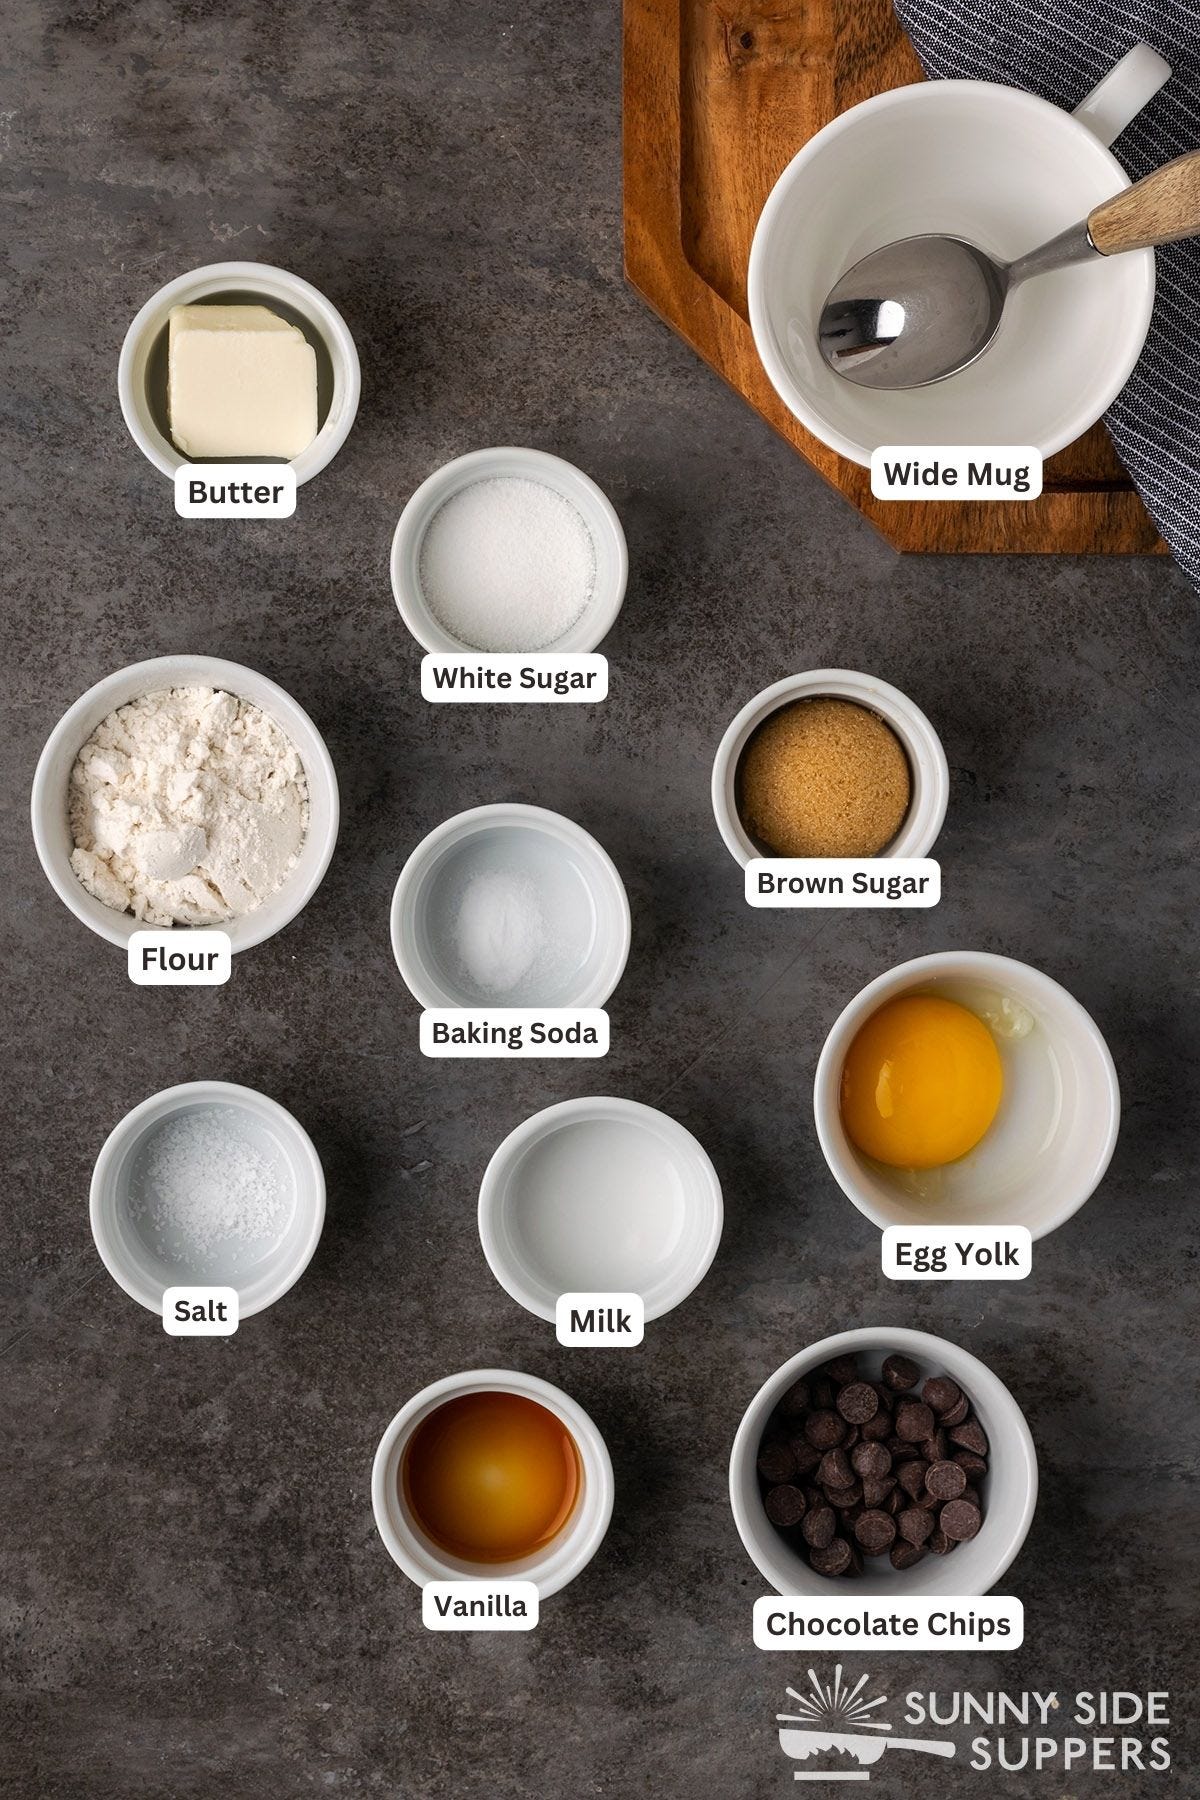 Ingredients for a chocolate chip cookie in a mug in small bowls.